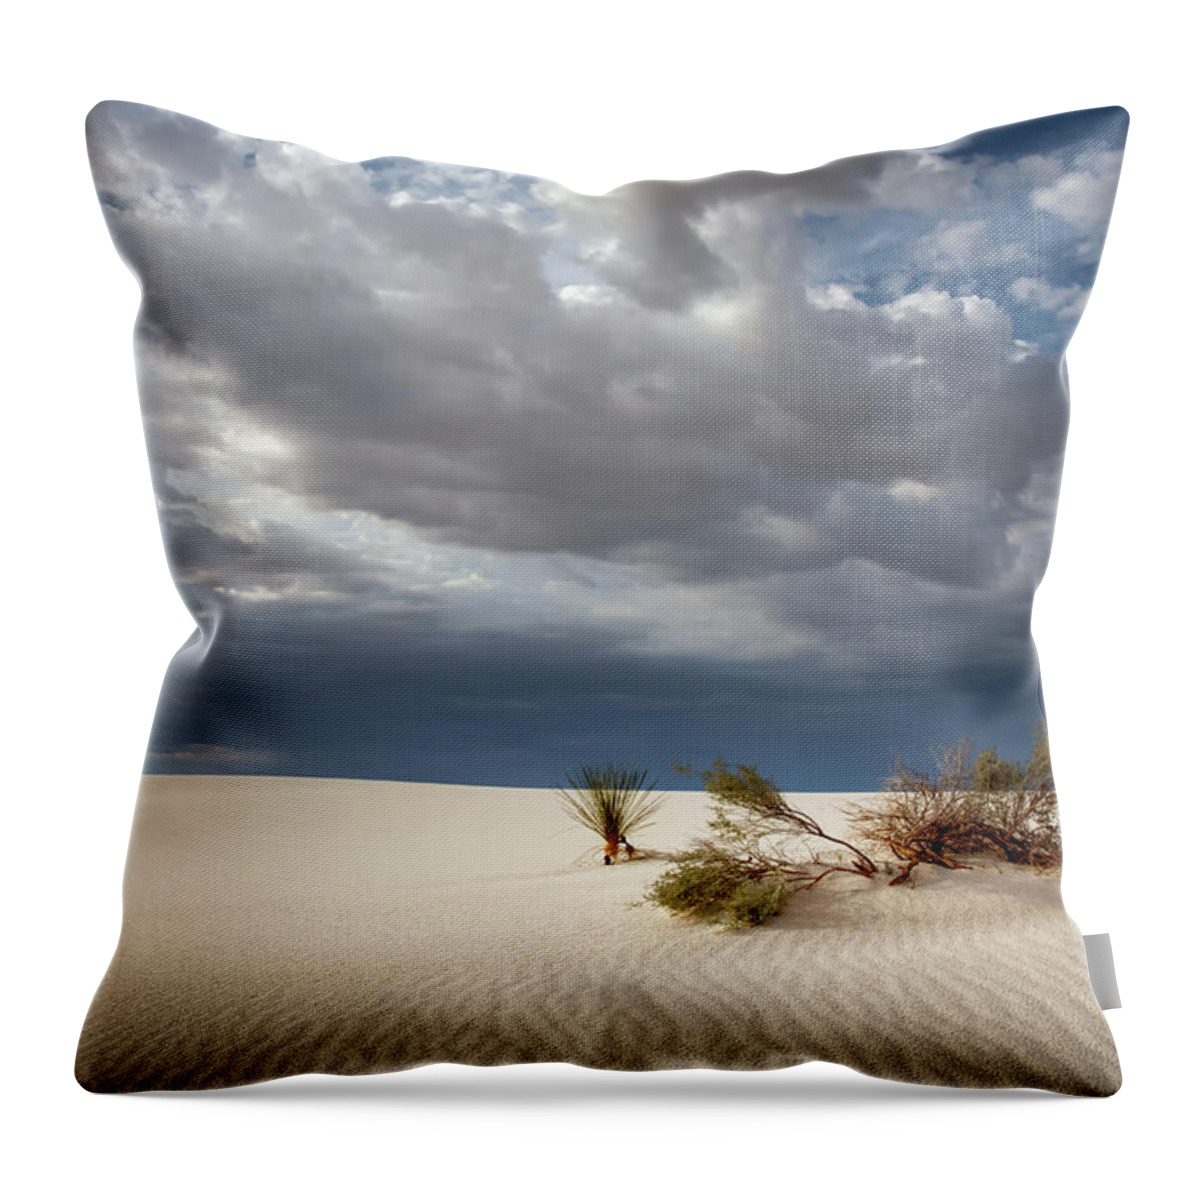 White Sands Throw Pillow featuring the photograph White Sands by James Barber